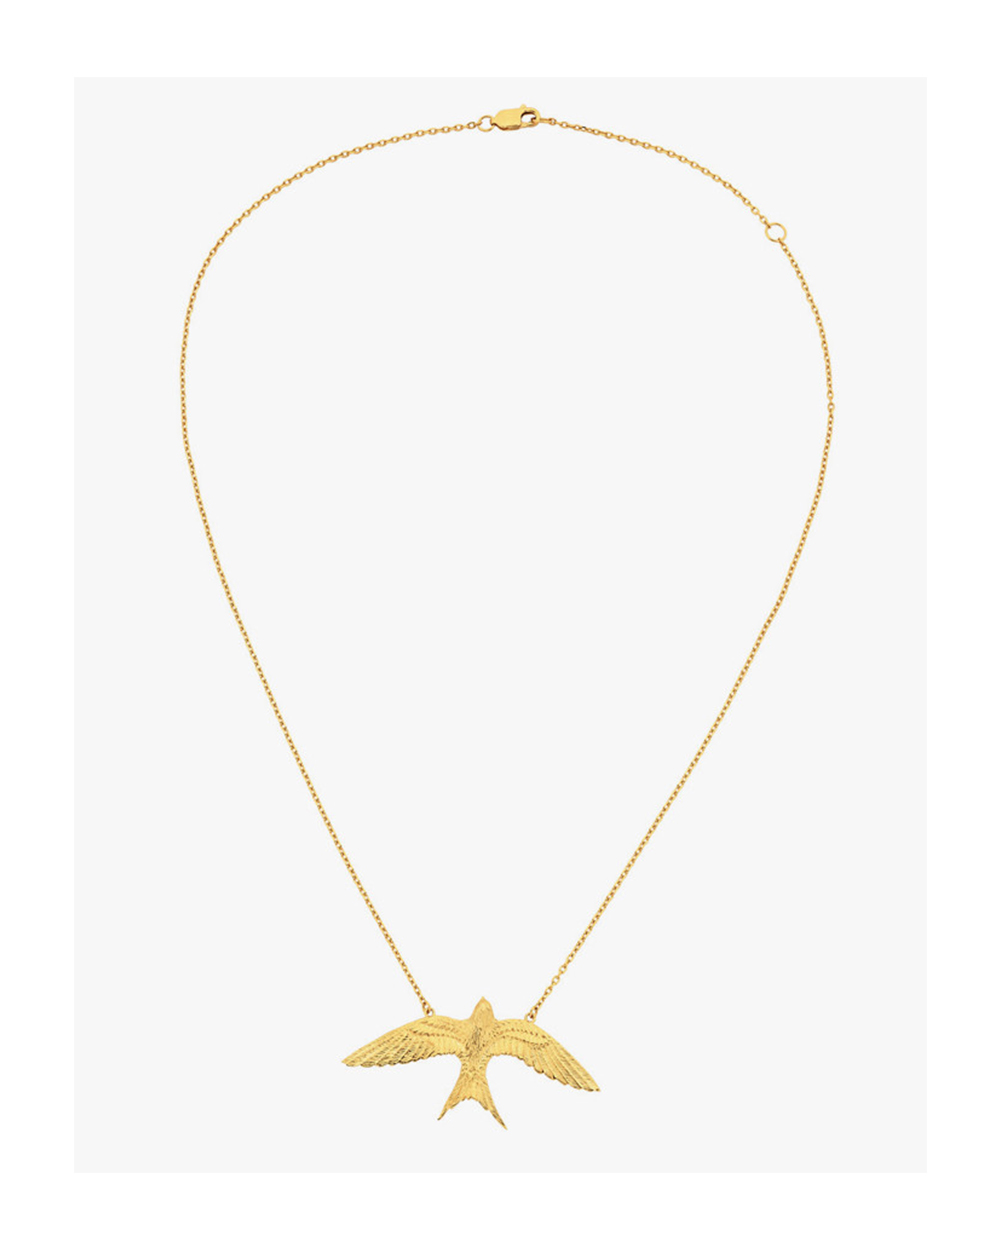 Zoe & Morgan Lover necklace, $259 from Superette